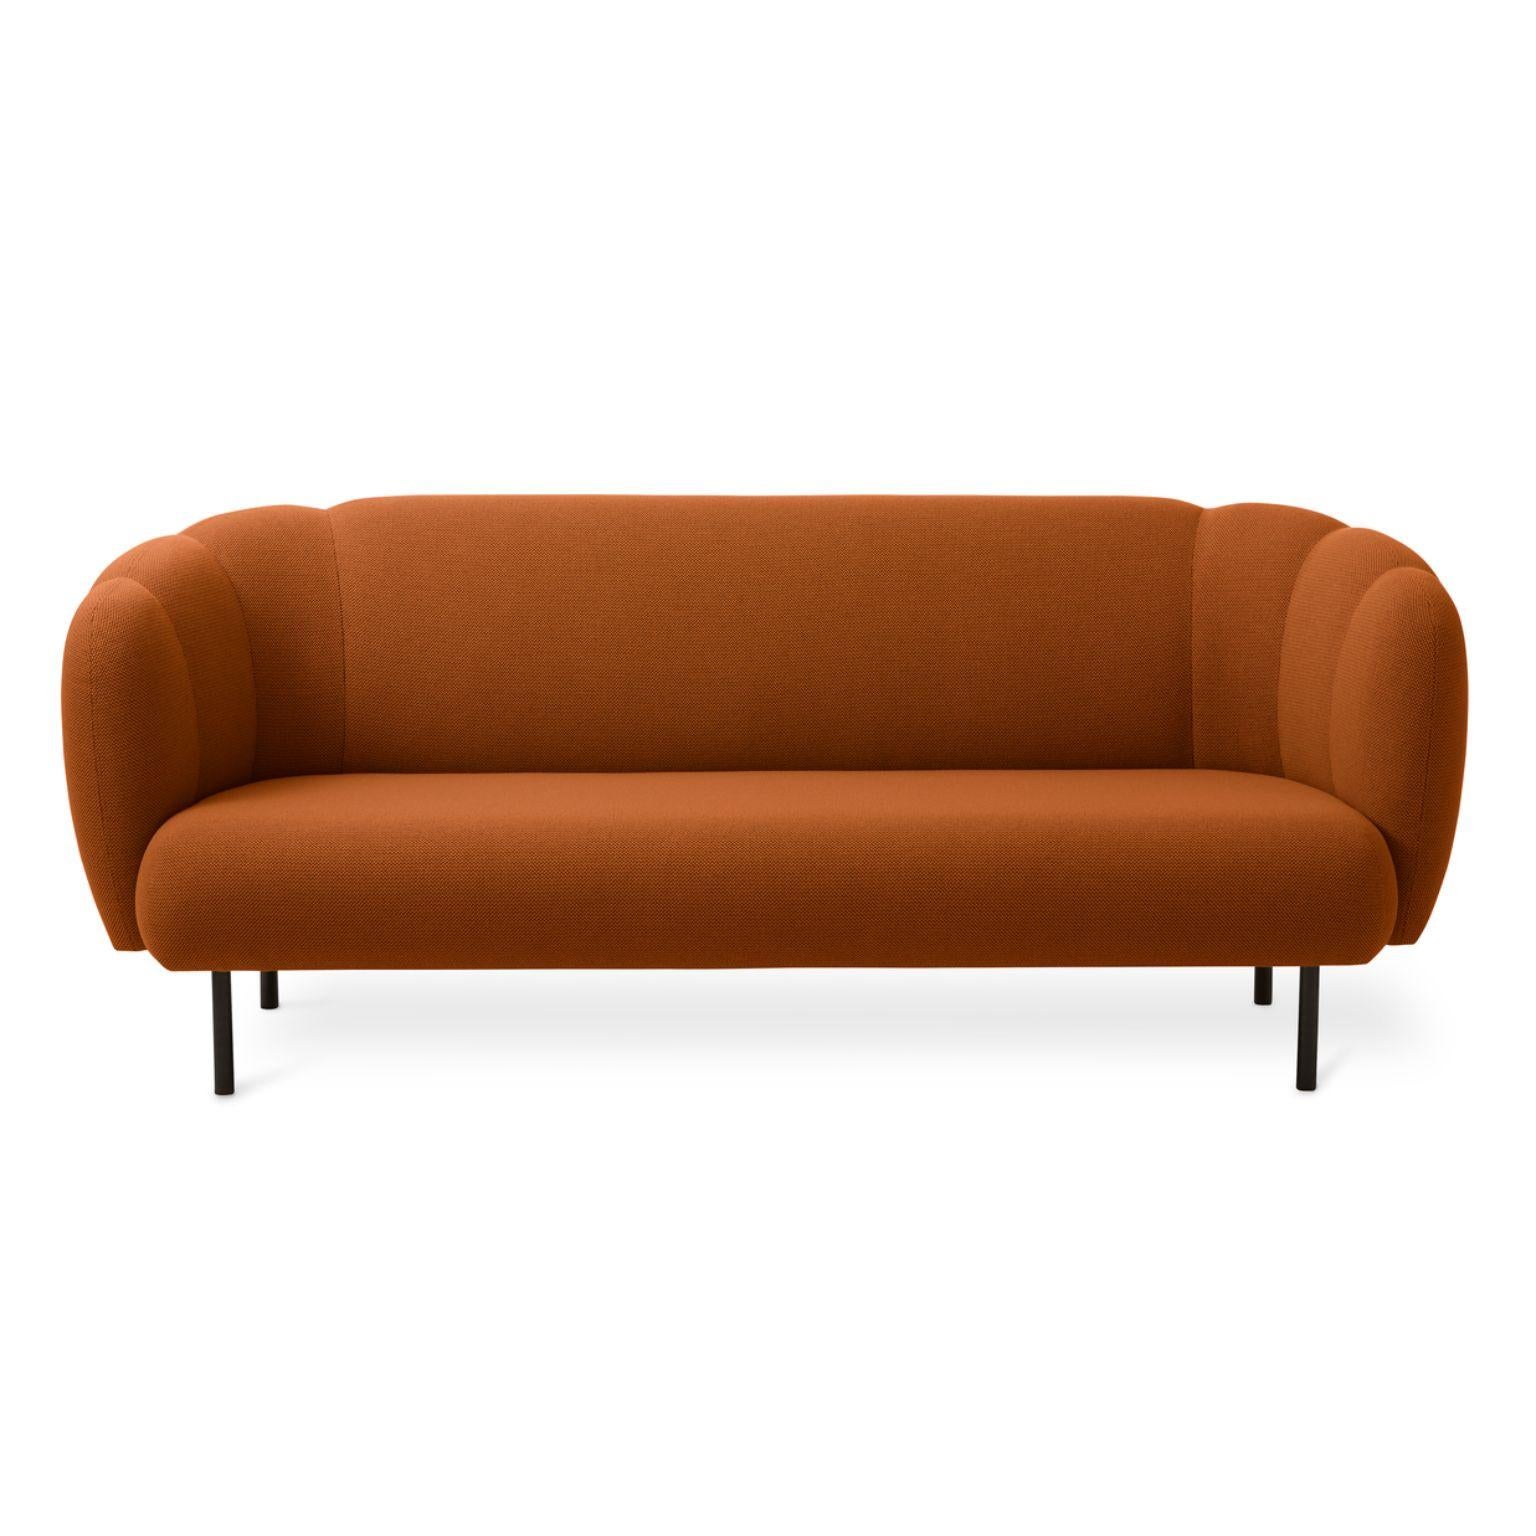 Caper 3 seater with stitches terracotta by Warm Nordic
Dimensions: D200 x W84 x H 80 cm.
Material: Textile upholstery, Wooden frame, Powder coated black steel legs.
Weight: 55.5 kg
Also available in different colours and finishes. 

An elegant